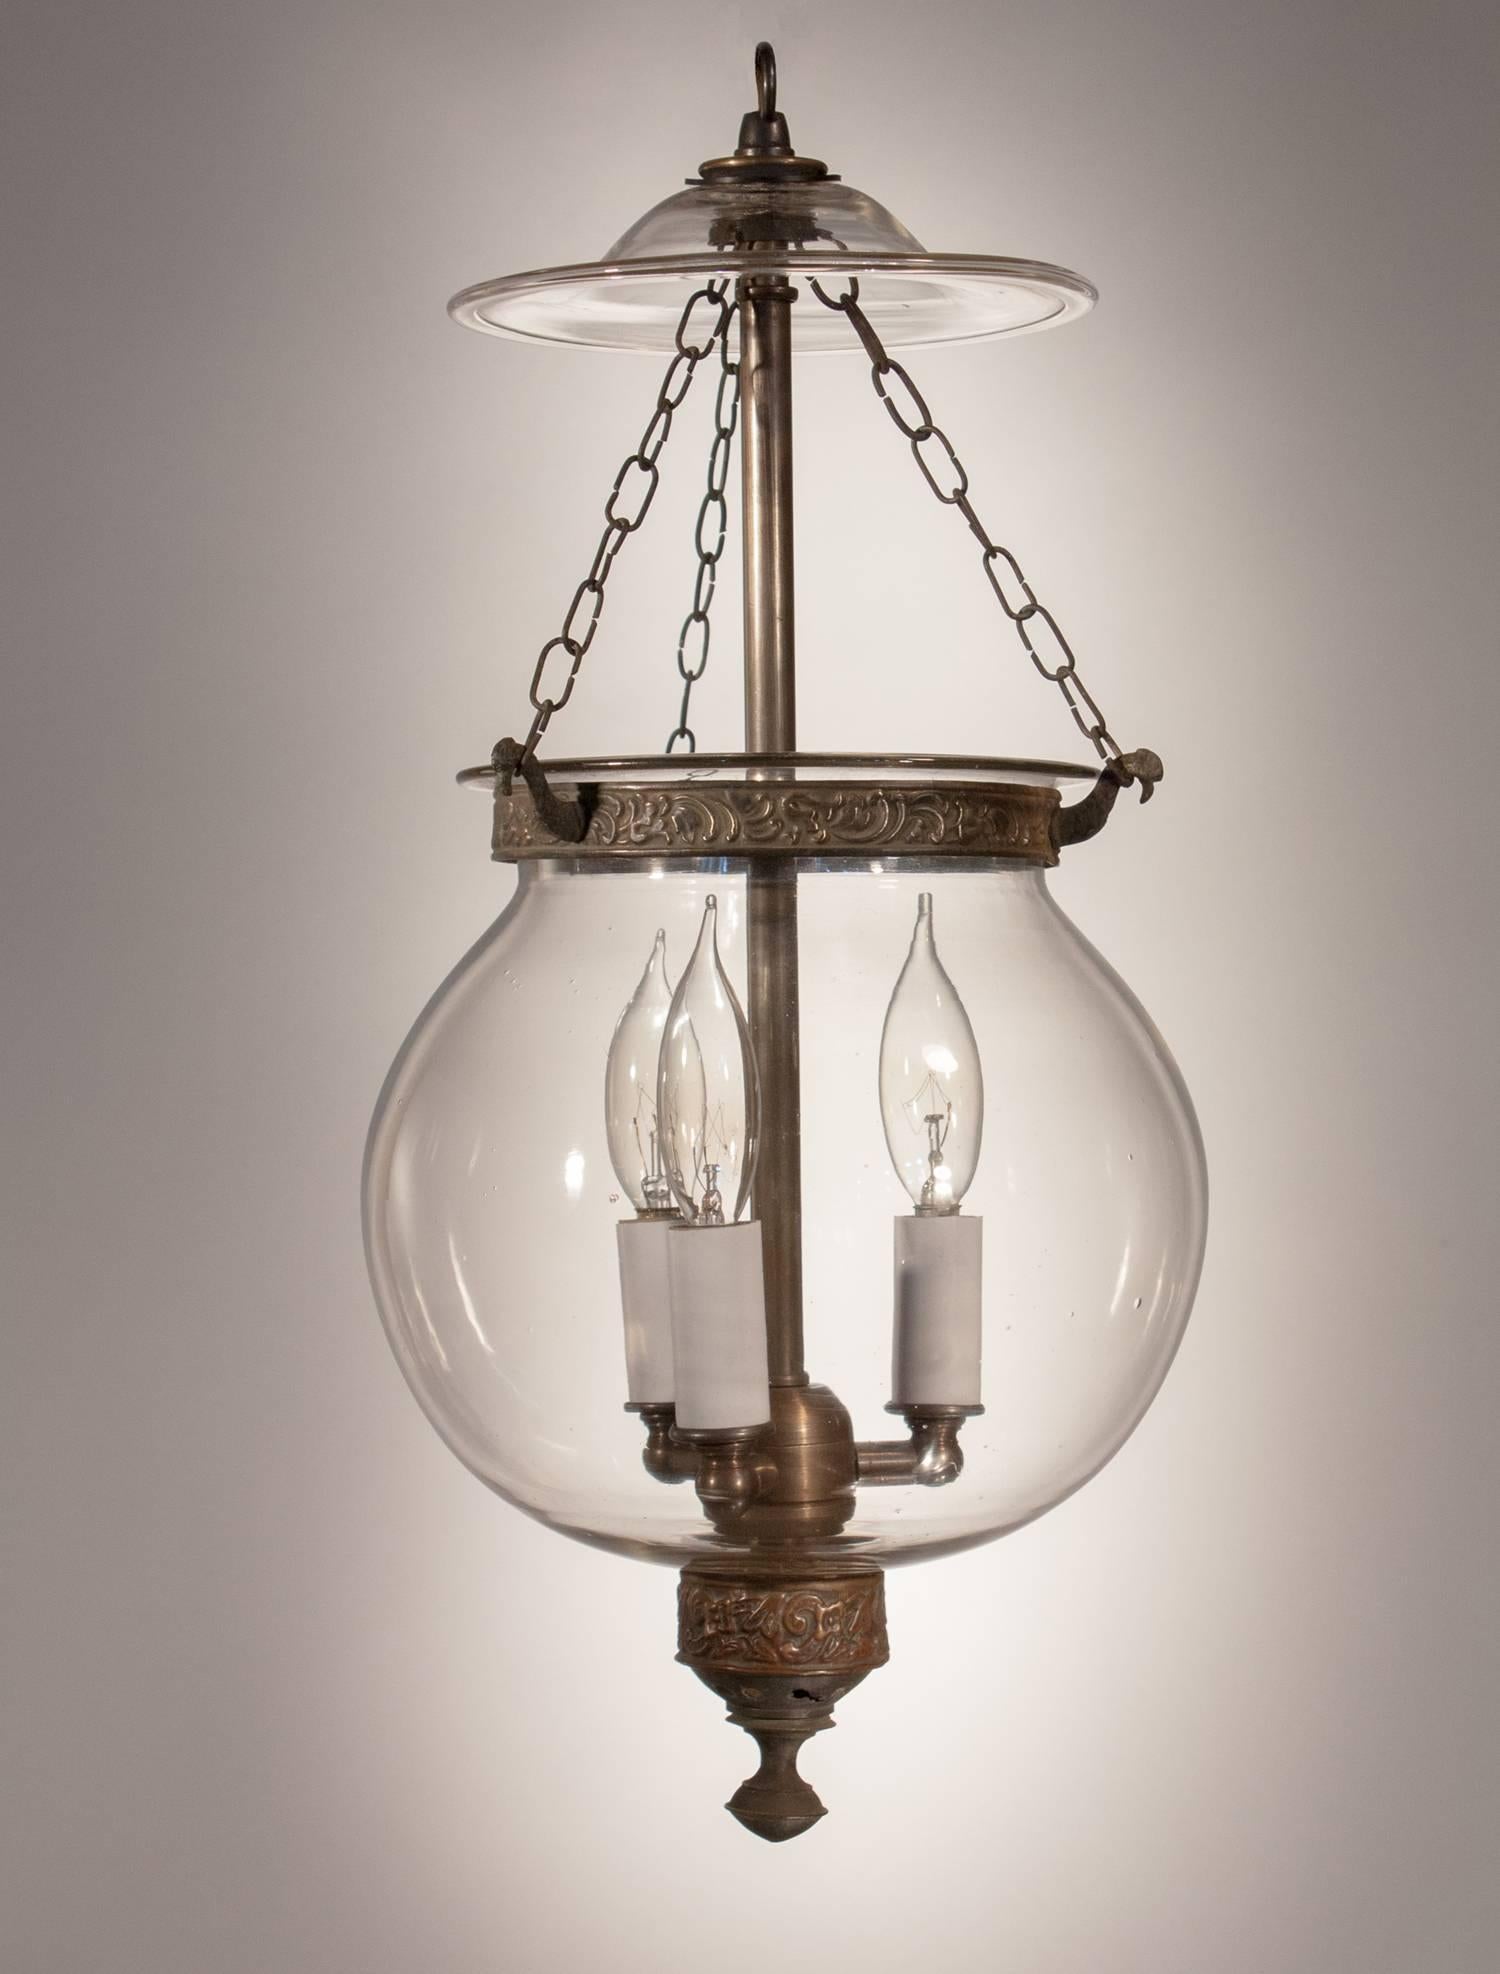 Charming clear glass hall lantern from England, circa 1860, with its original embossed brass band and candle holder finial base. The globe has a lovely shape and several desirable air bubbles in the hand blown glass. It has been newly electrified